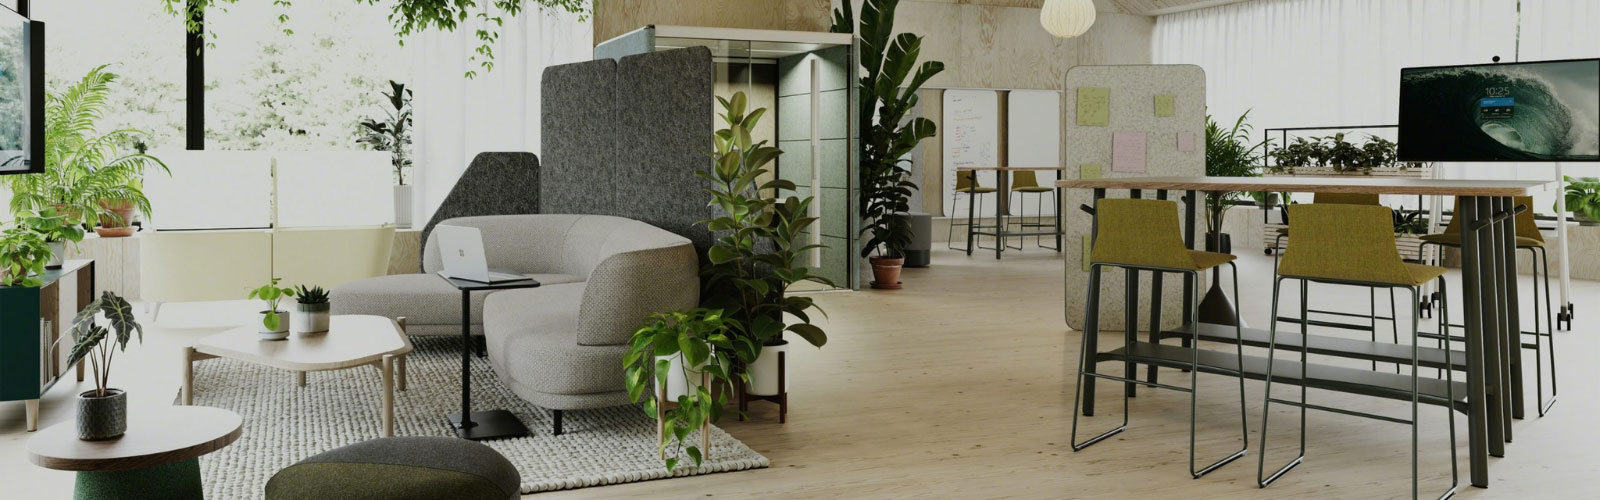 Agile working office space with greenery